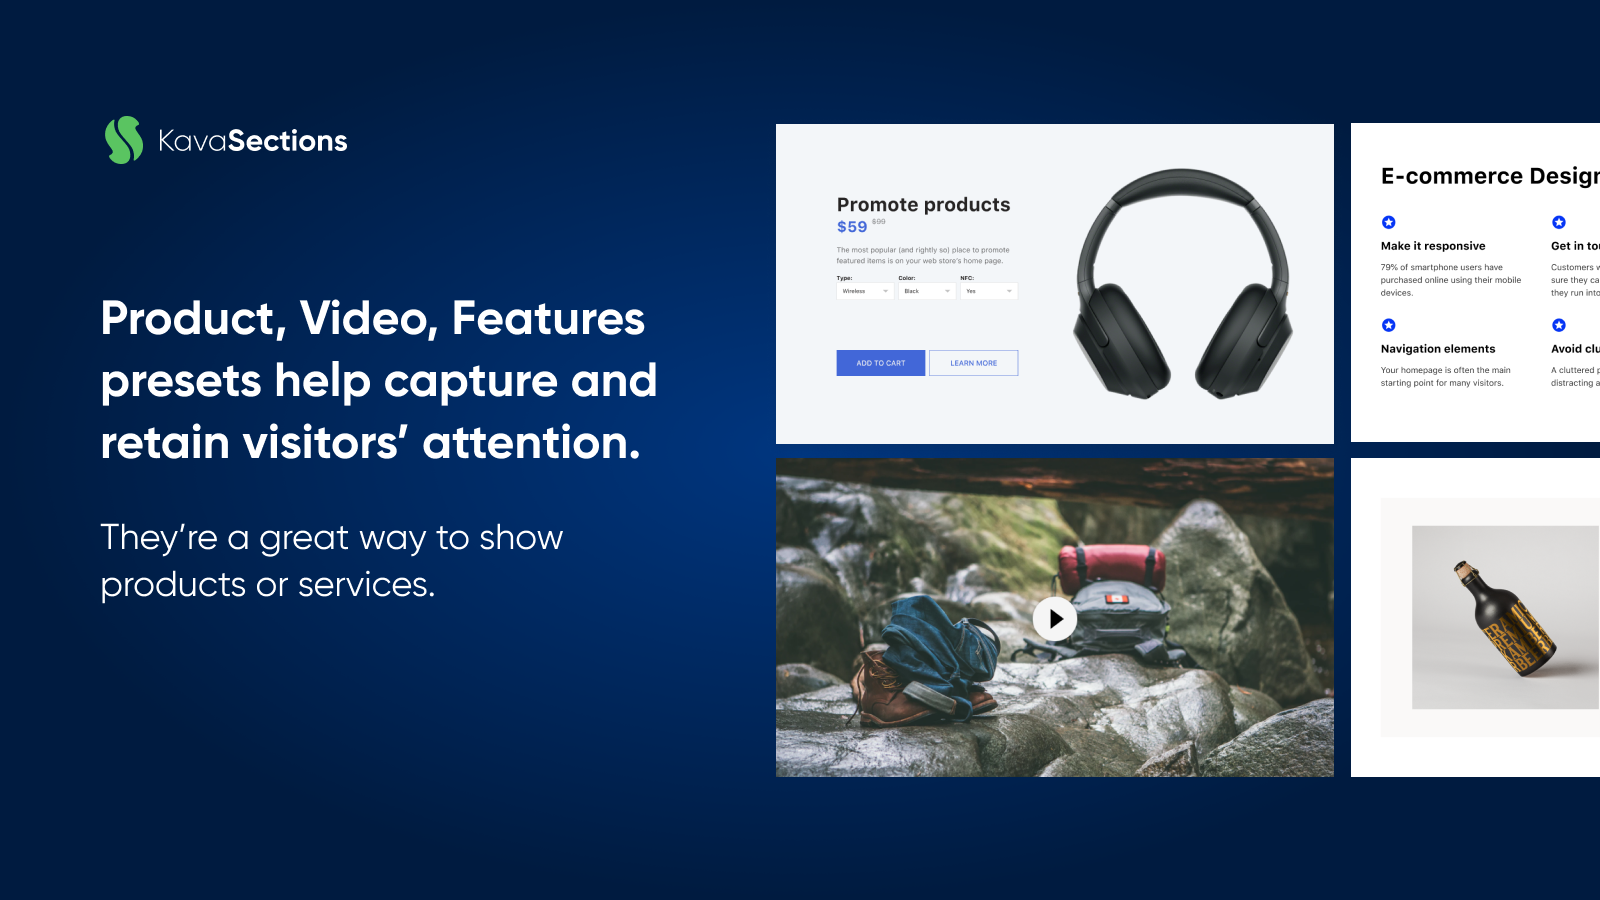 Page Builder for Product, Video, Features presets, etc.